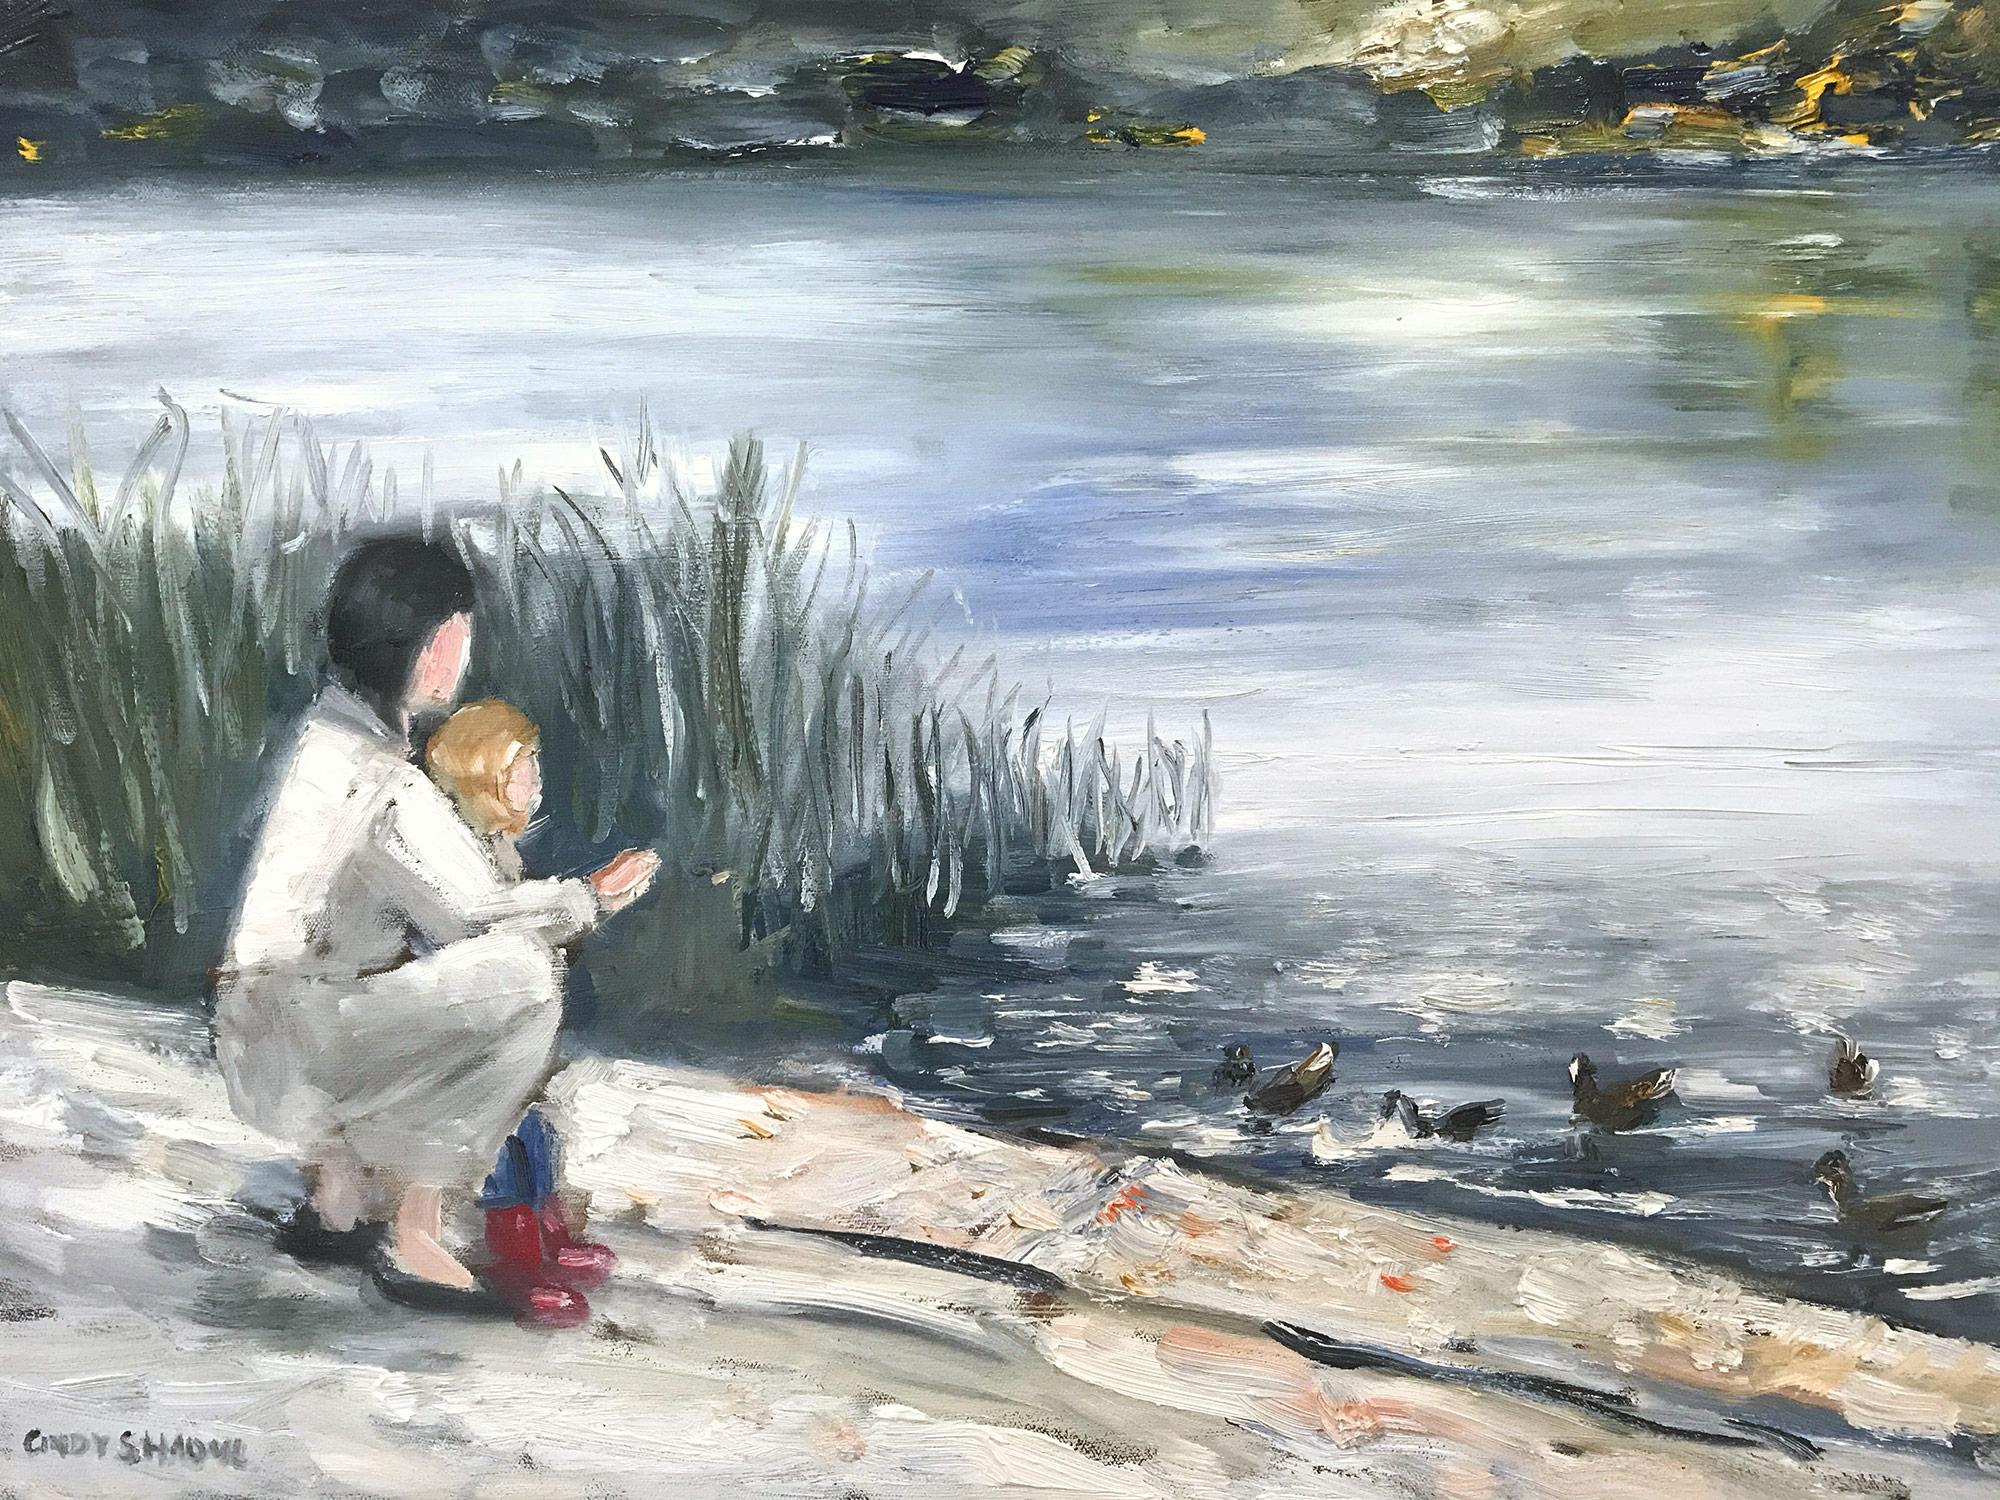 Cindy Shaoul Landscape Painting - "Feeding the Ducks" Impressionistic Oil Painting on Canvas with Figures & Water 